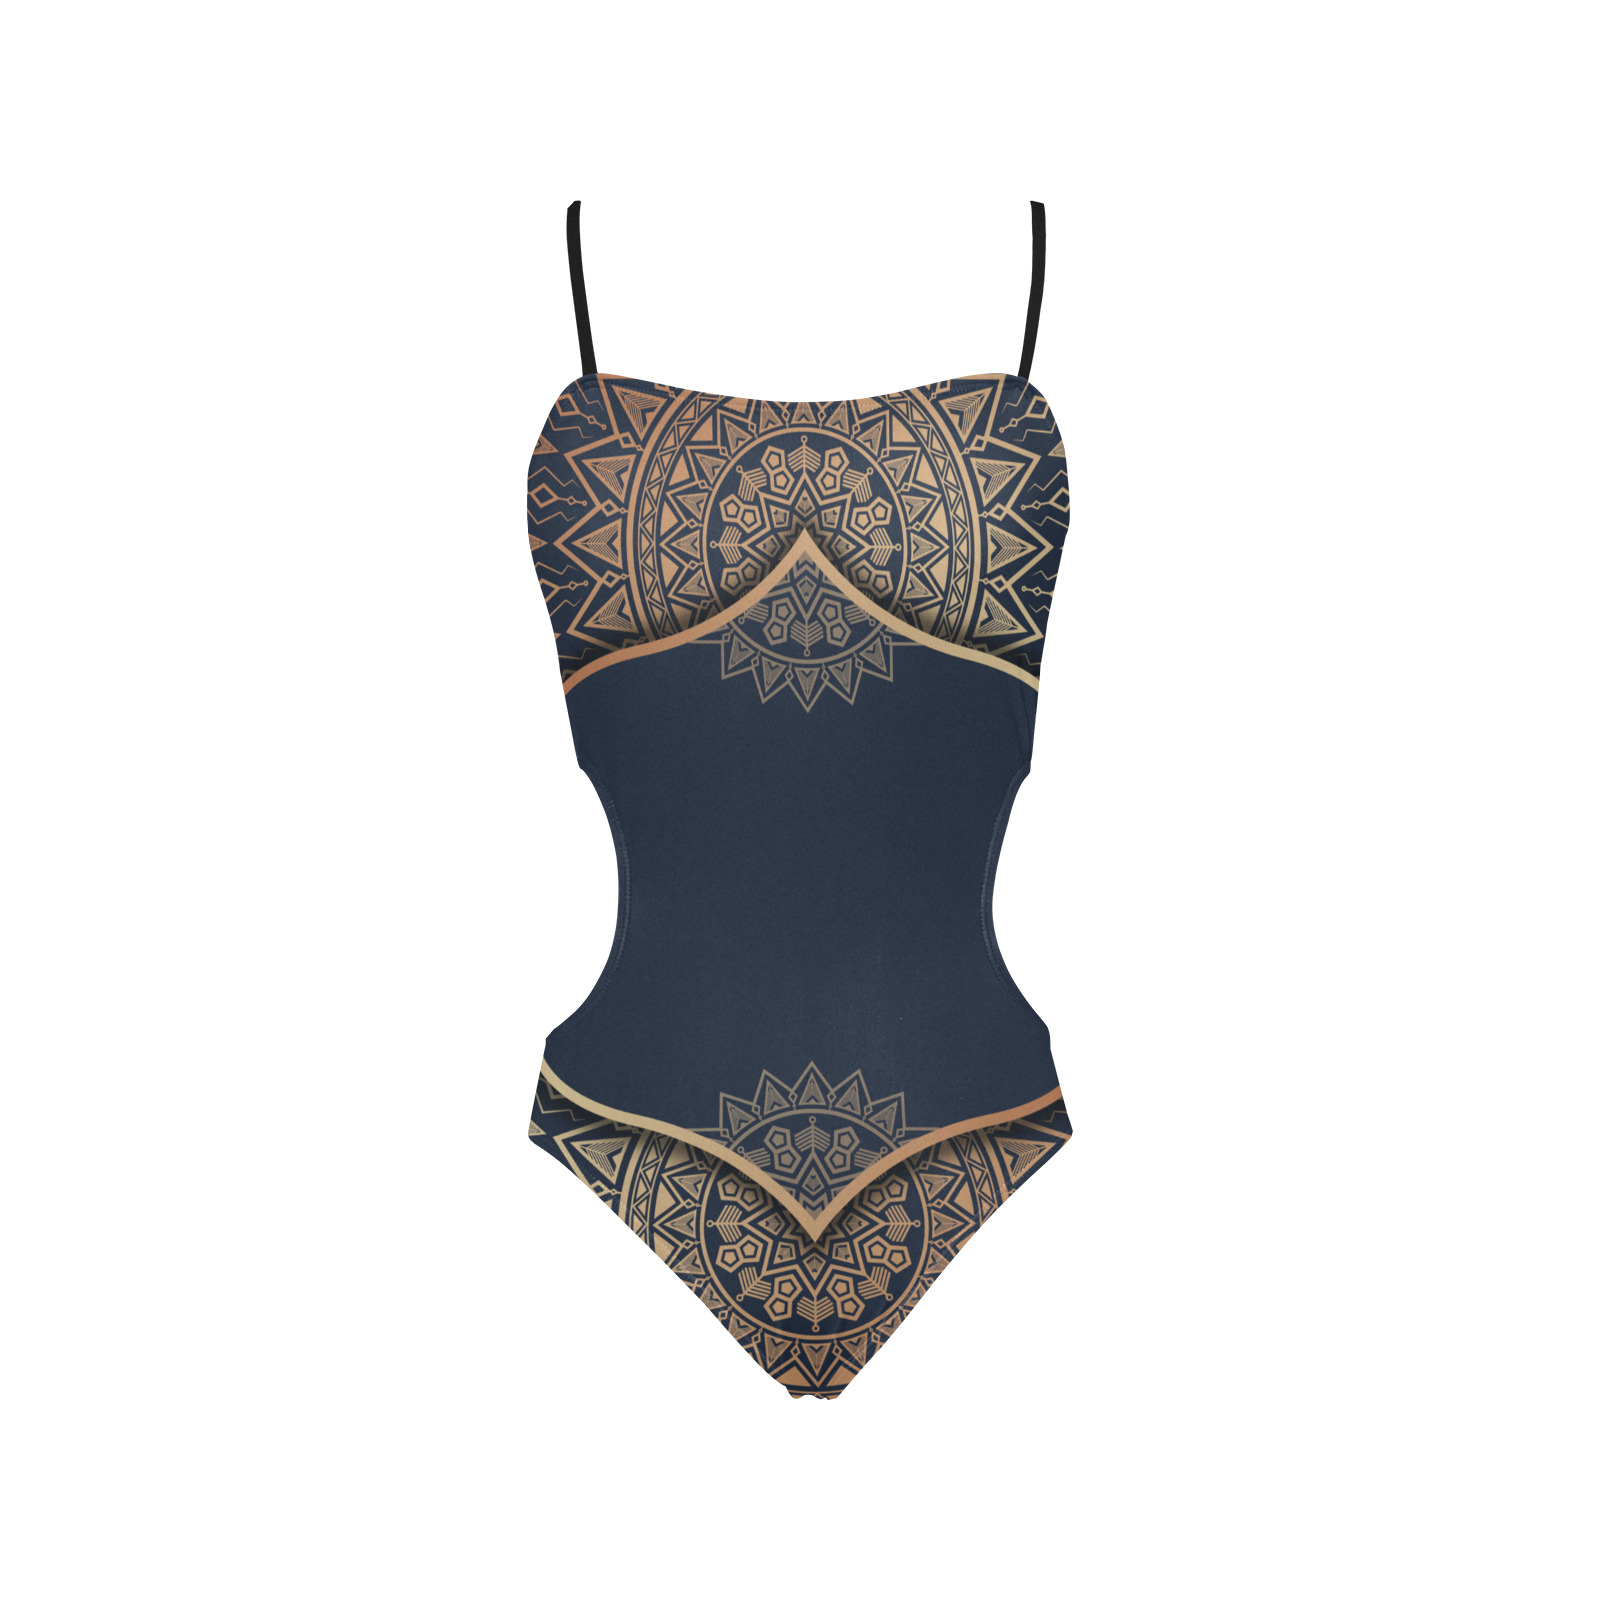 Mandala Armor in navy and gold tones Spaghetti Strap Cut Out Sides Swimsuit (Model S28)